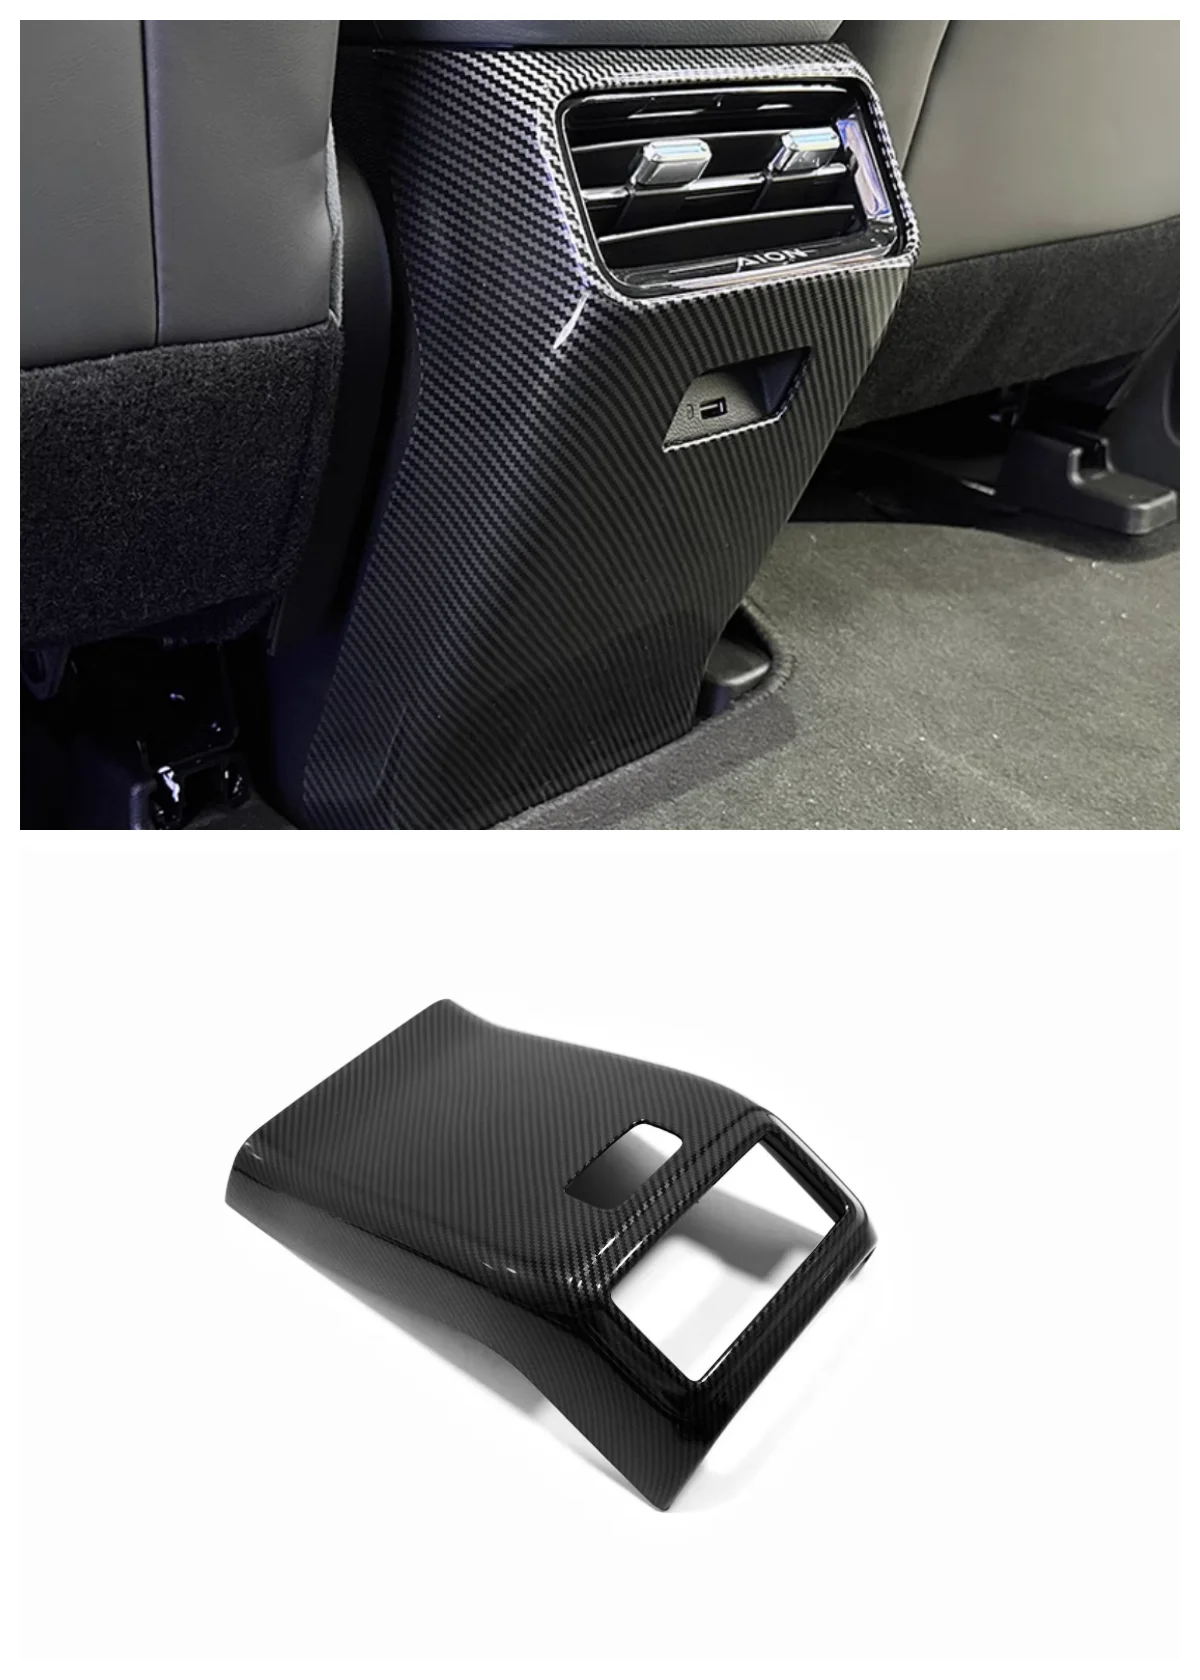 

Applicable to the anti kick decoration of the 2022GAC Aion Y rear air outlet panel